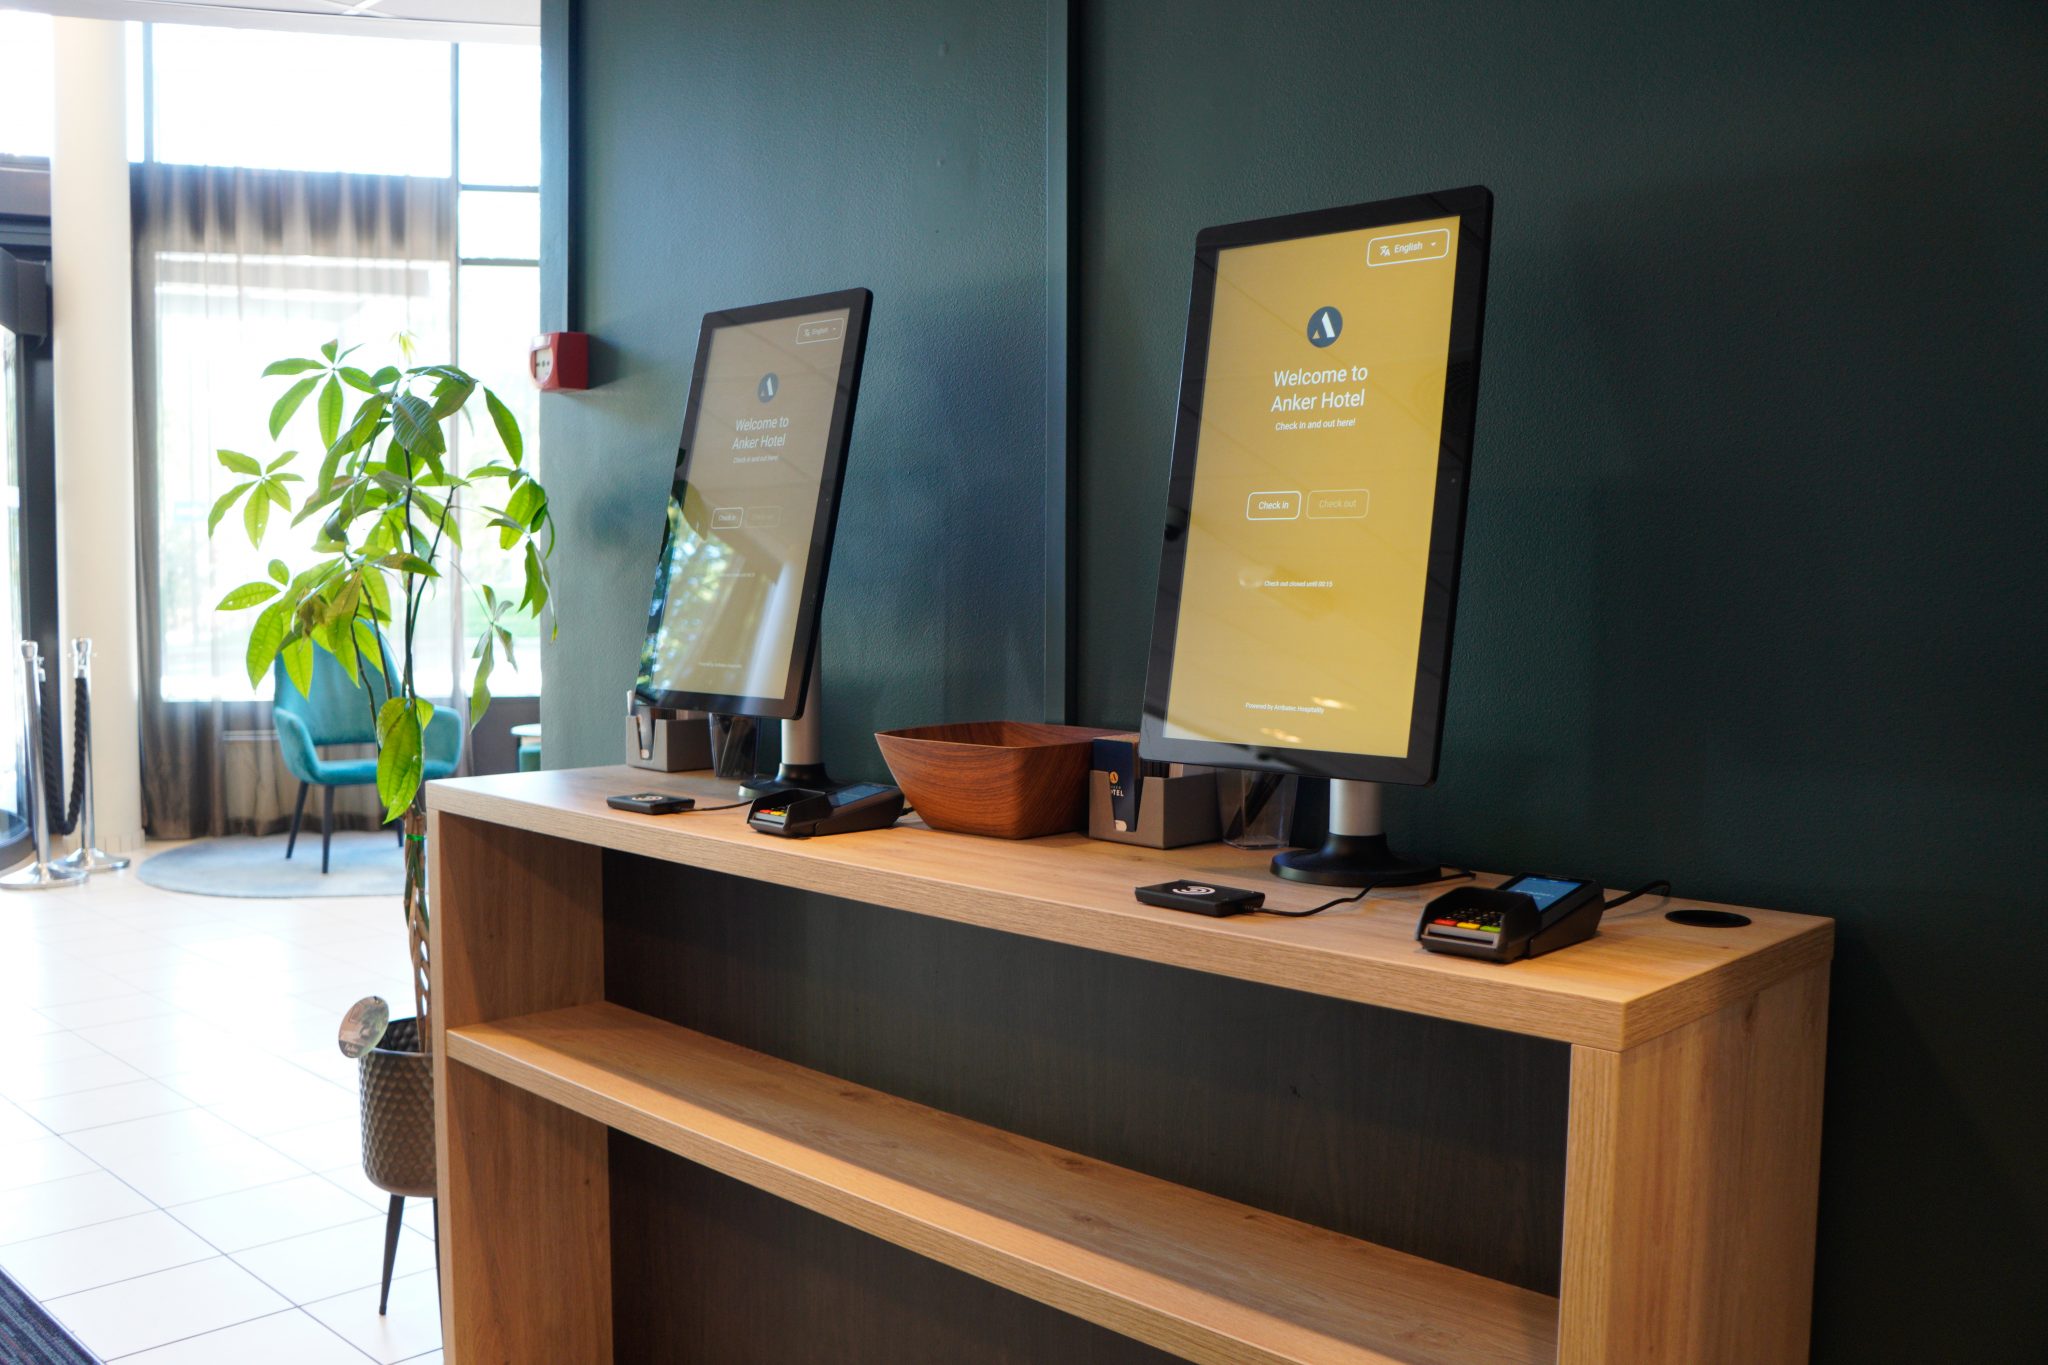 Anker Hotel meeting the future with self check-in